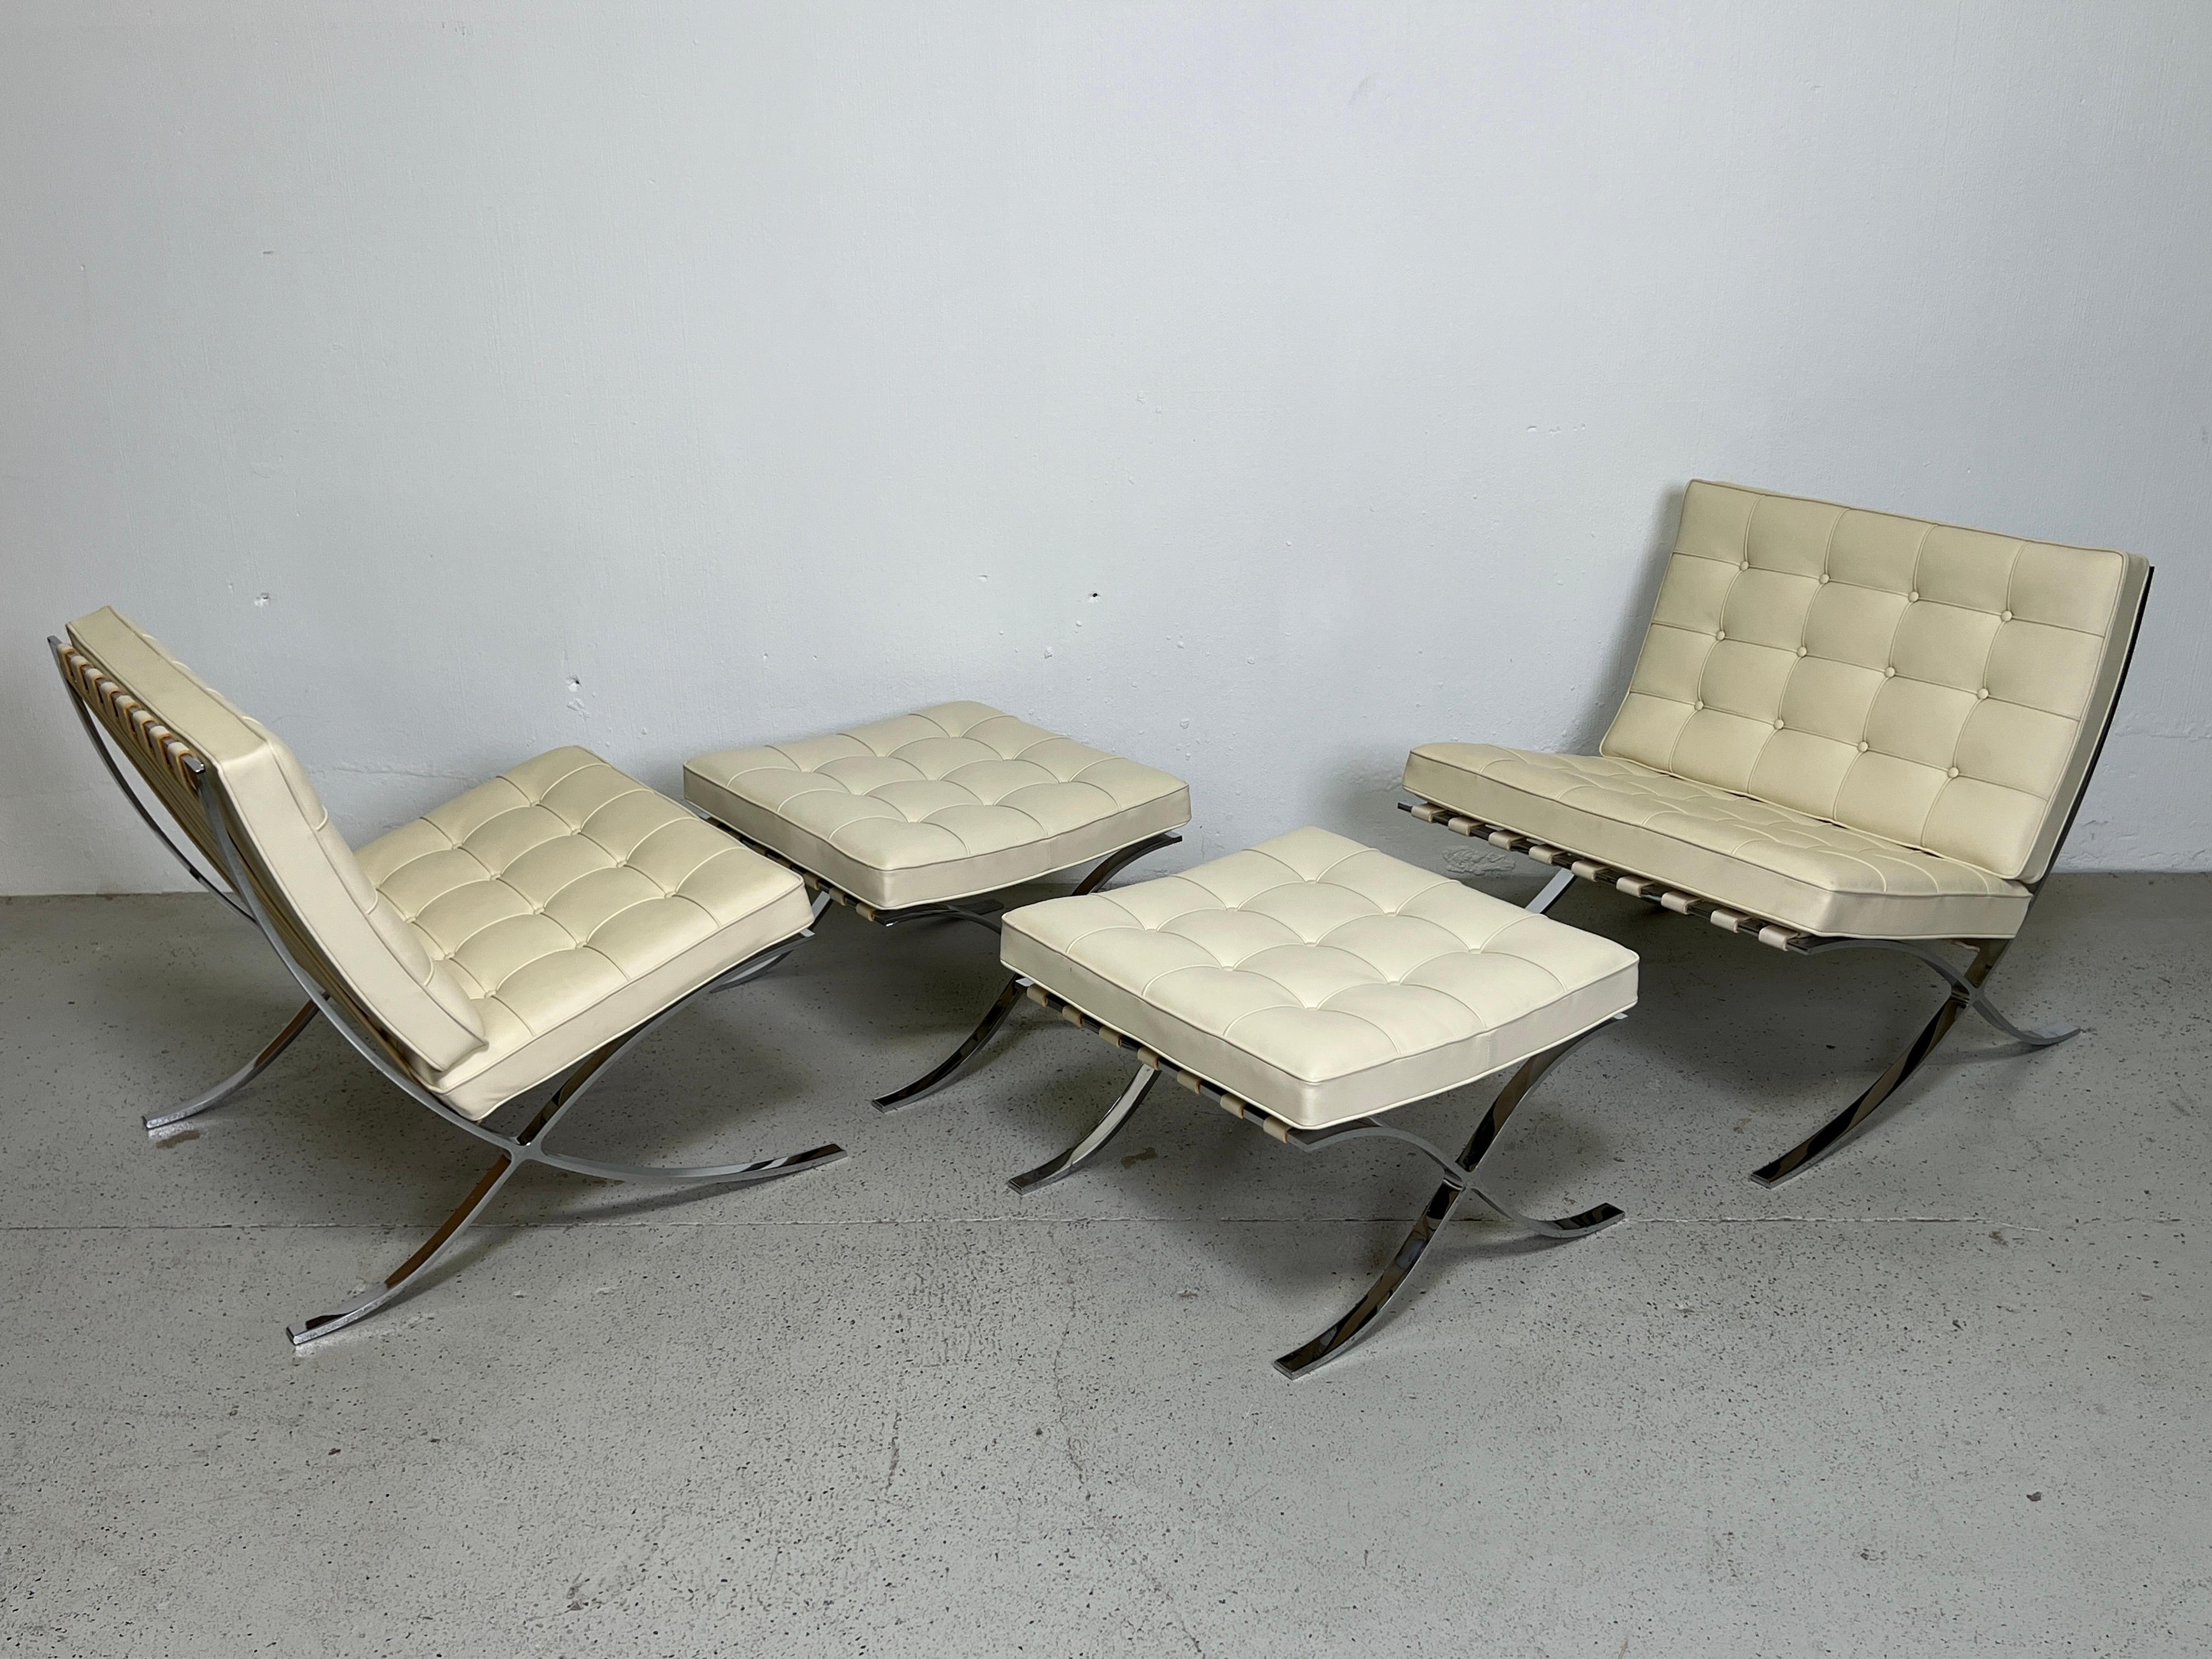 Pair of Barcelona Chairs and Ottomans by Mies van den Rohe for Knoll In Good Condition For Sale In Dallas, TX